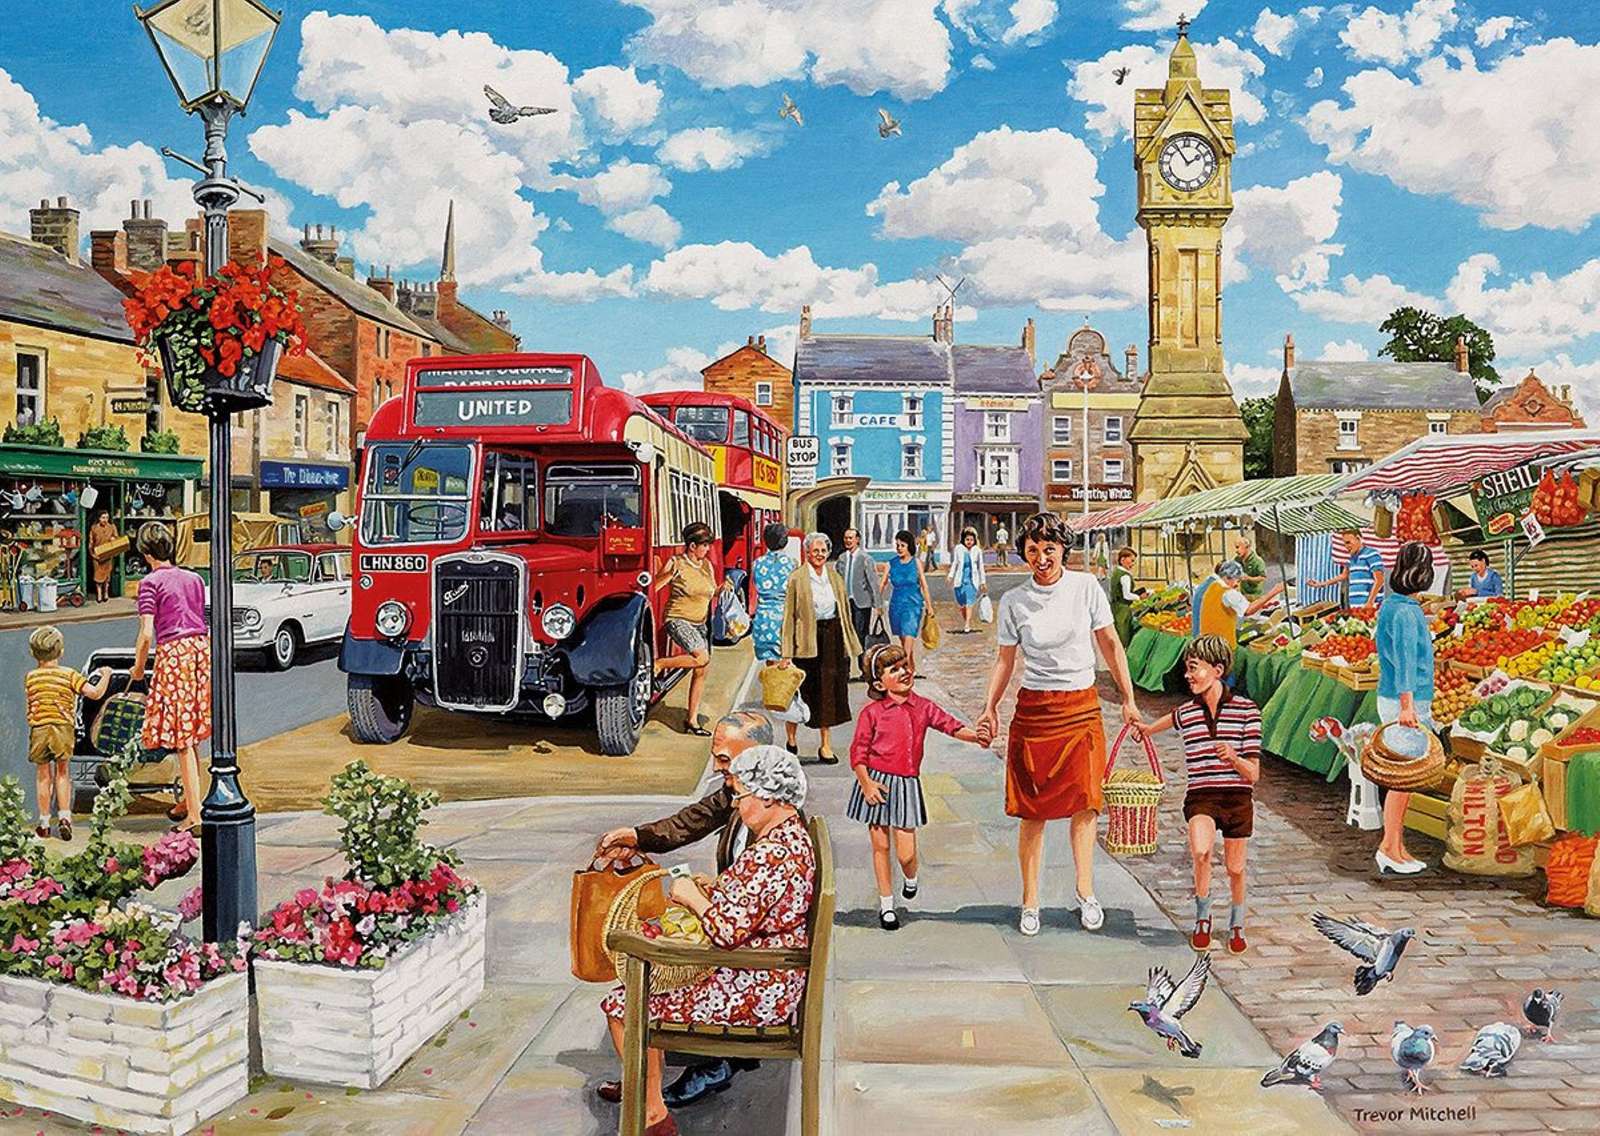 Return from the market jigsaw puzzle online